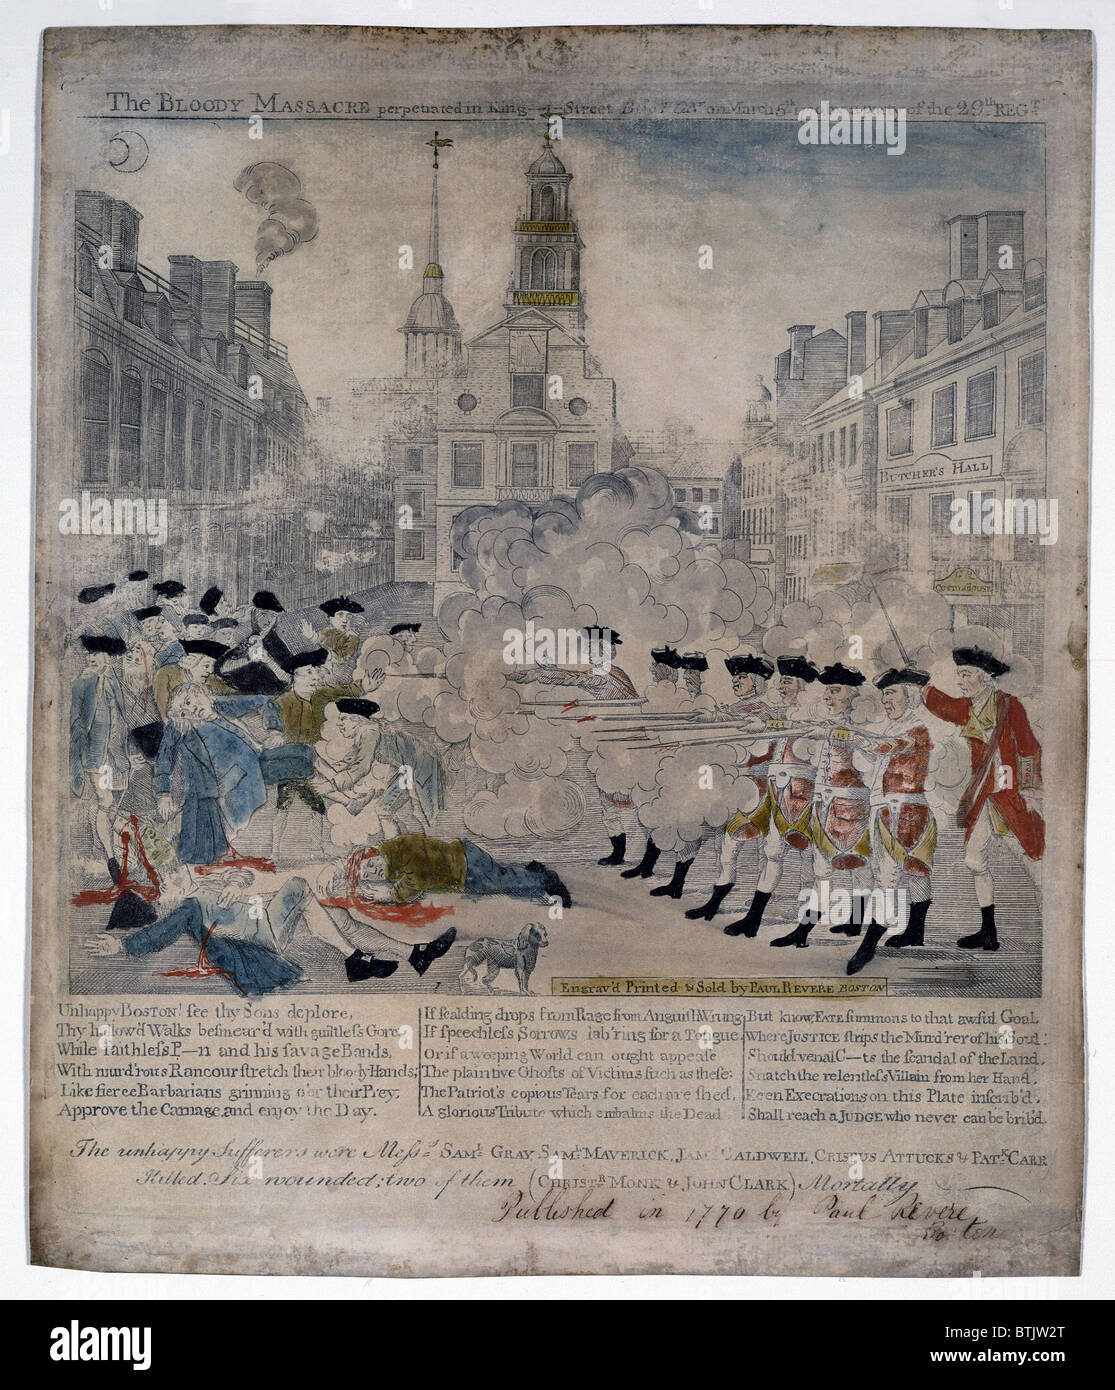 Boston Massacre. British troops shoot into and a crowd in Boston, Mass. on March 5, 1770, killing five civilians including, Samuel Gray, Crispus Attucks (an African American), Patrick Carr, John Clark. Engraving by Paul Revere with watercolor. Stock Photo